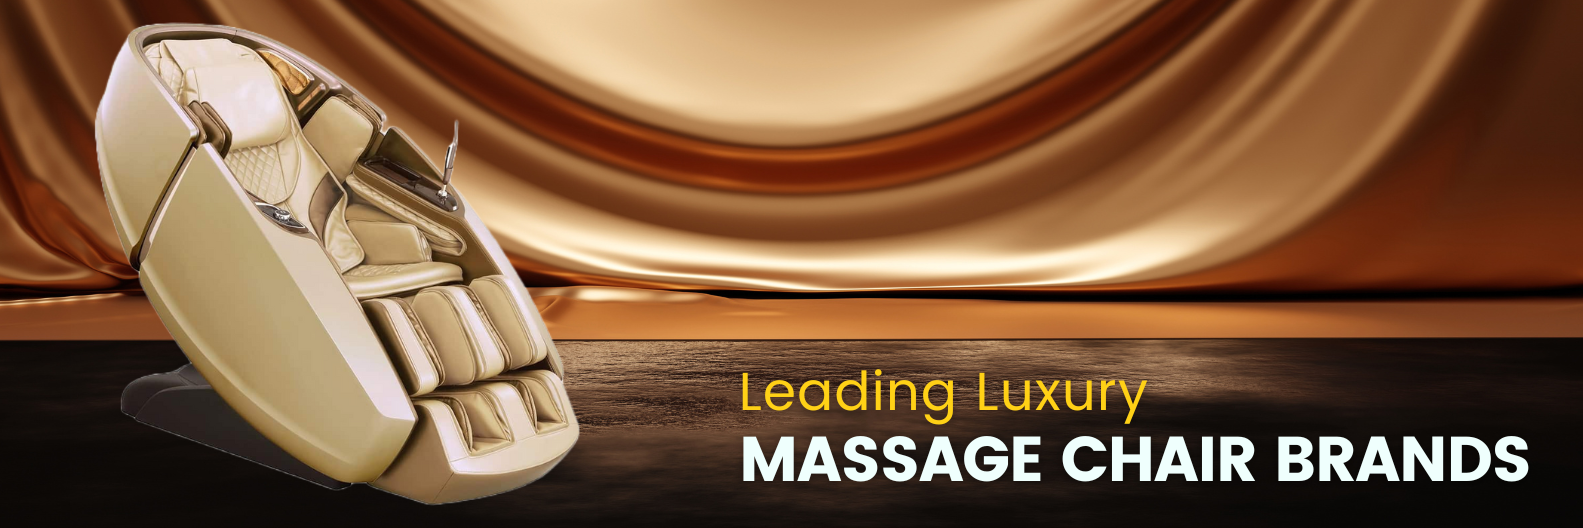 Explore the finest high-end massage chair brands for unparalleled luxury and relaxation. Discover the best choices to elevate your well-being today.